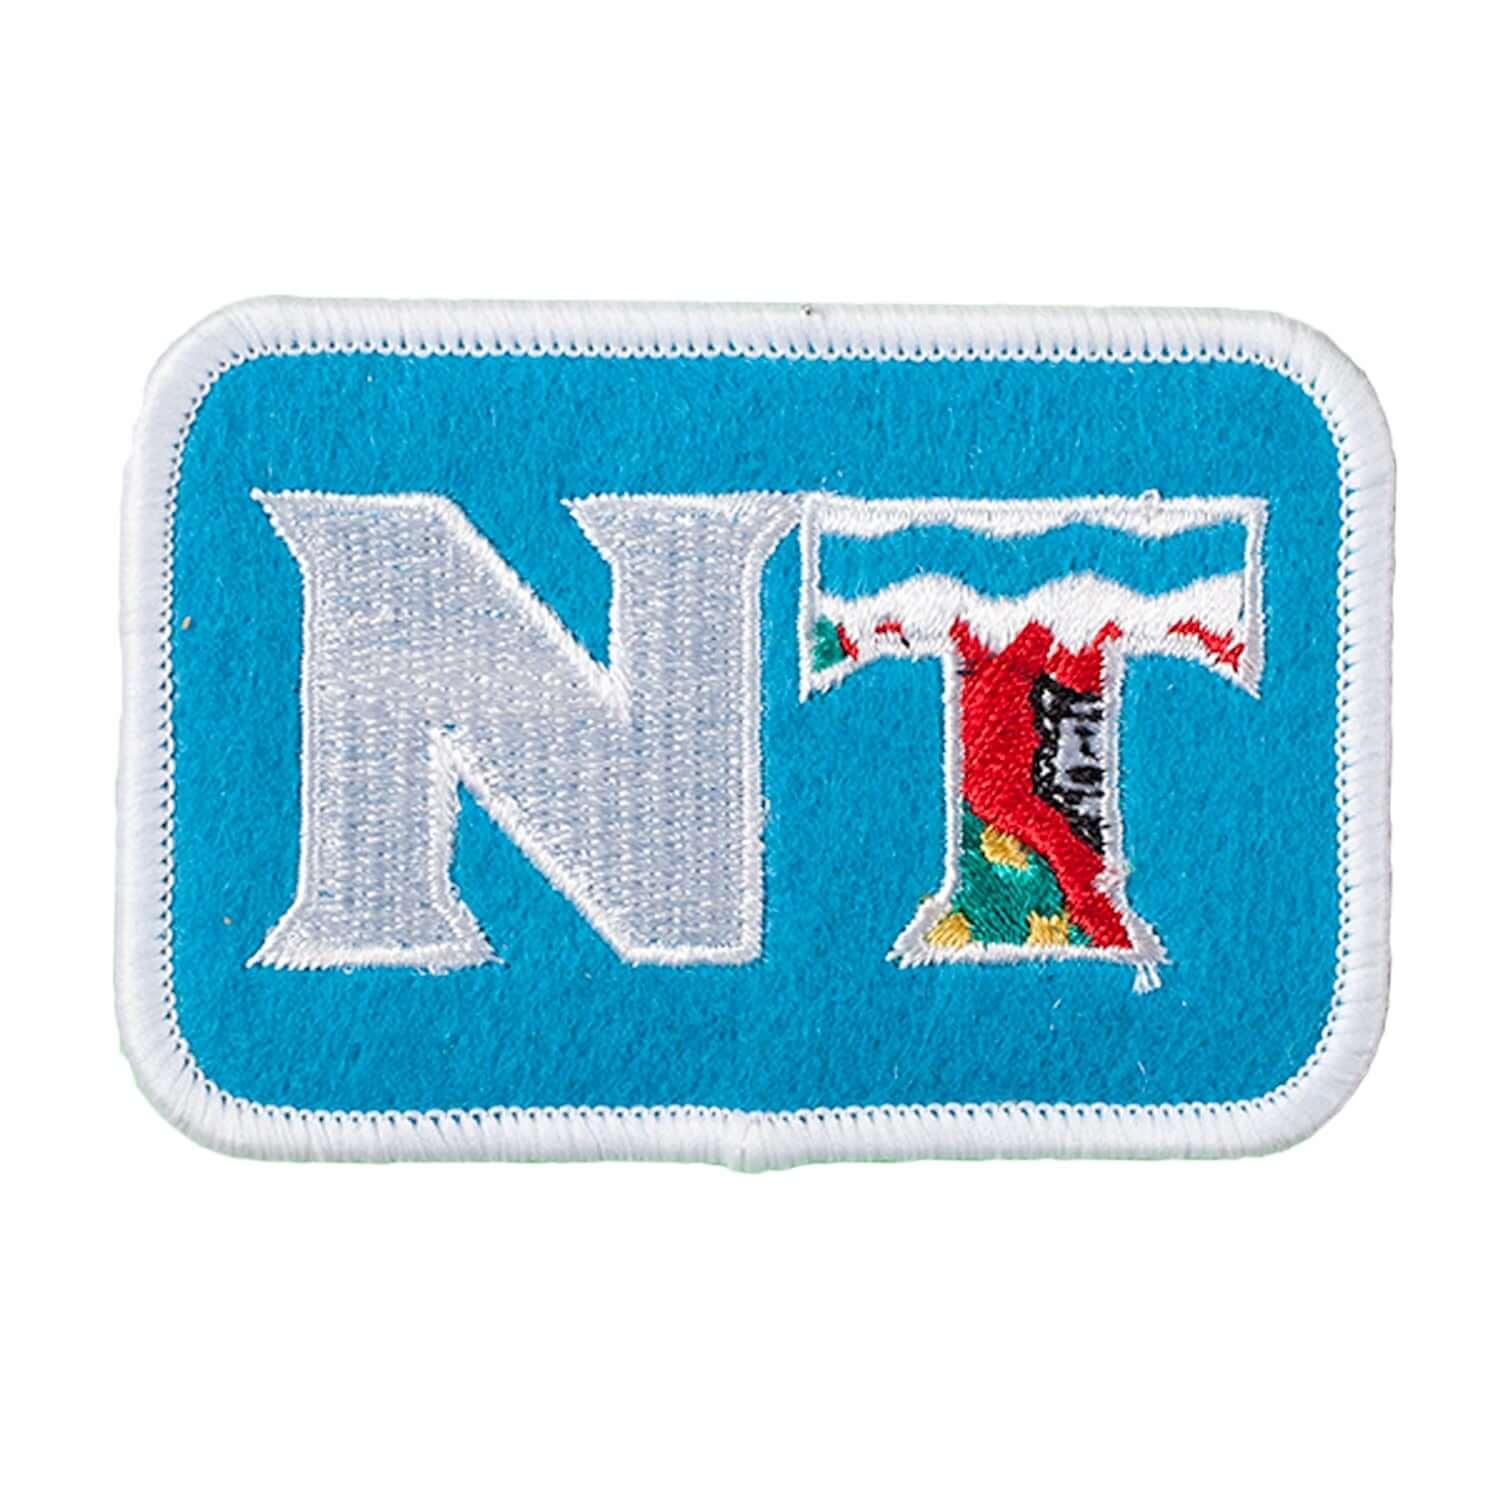 Northwest Territories Province Proud Patch - Rocket Factory Apparel